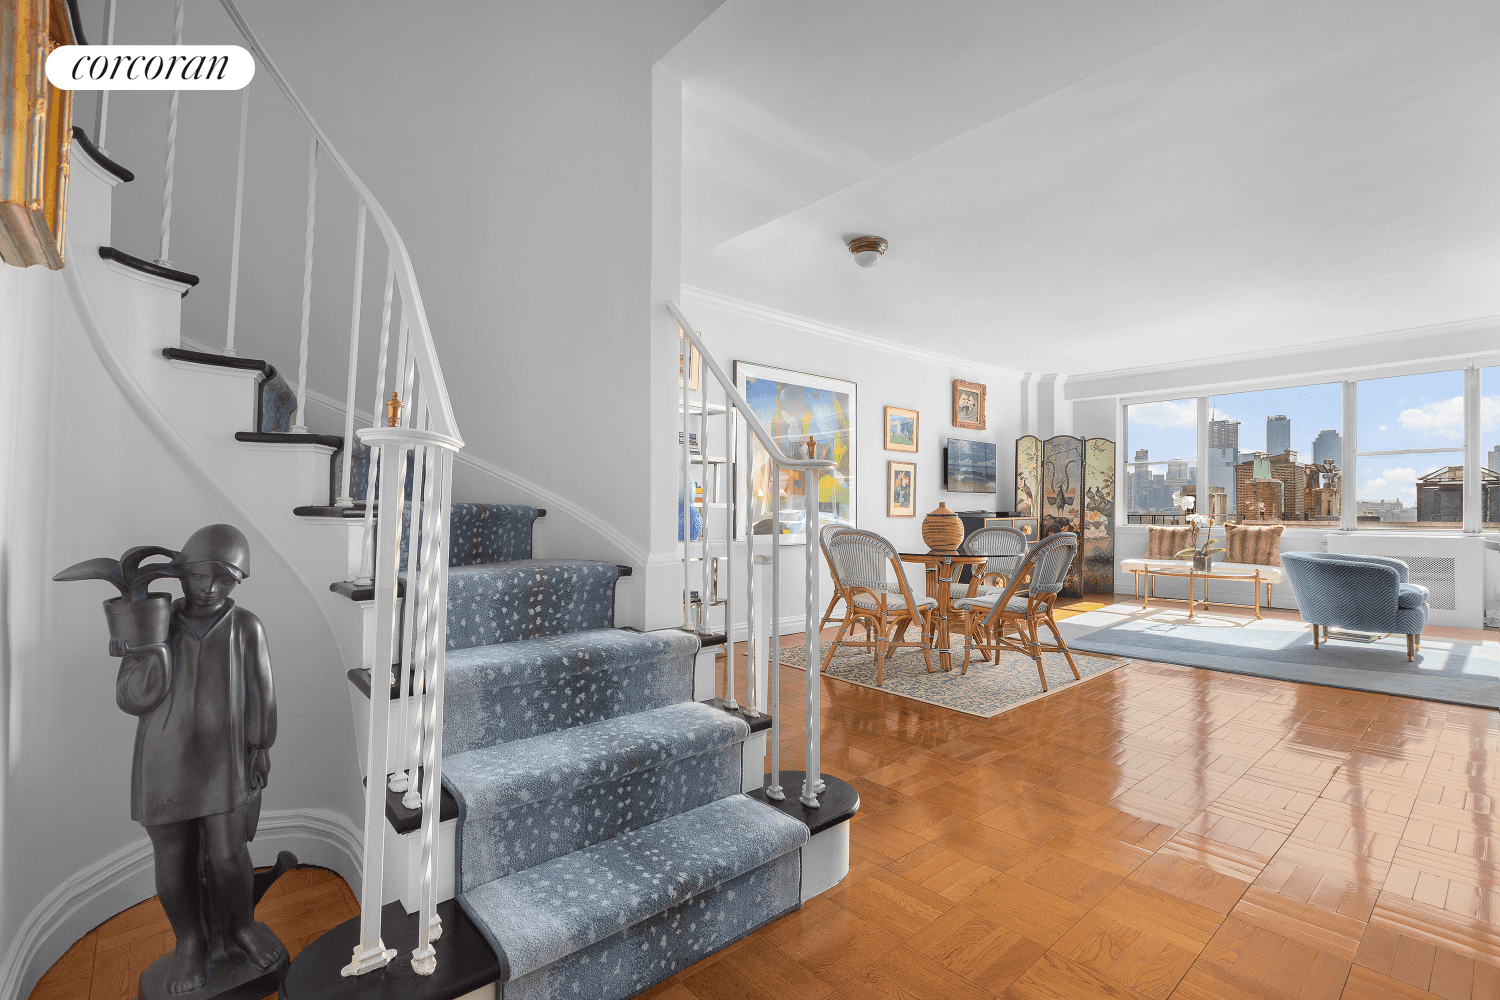 Experience the allure of Beekman Place with this expansive one bedroom duplex boasting two full baths, nestled within a tranquil cul de sac in the east 50s, overlooking the East ...